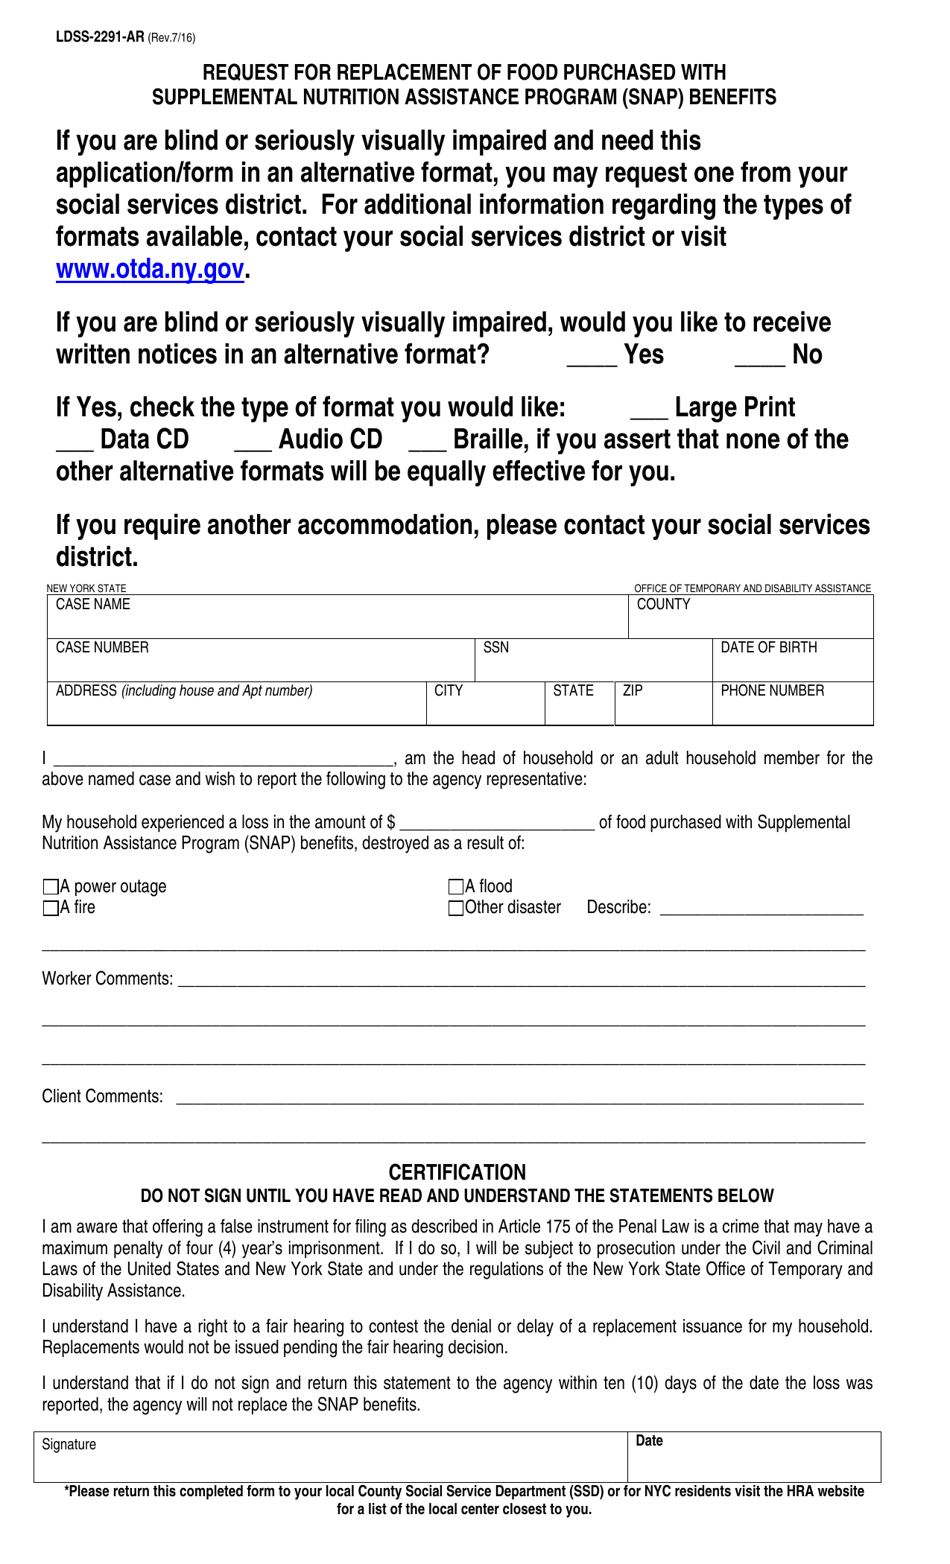 Form LDSS-2291 Request for Replacement of Food Purchased With Supplemental Nutrition Assistance Program (Snap) Benefits - New York (English / Arabic), Page 1